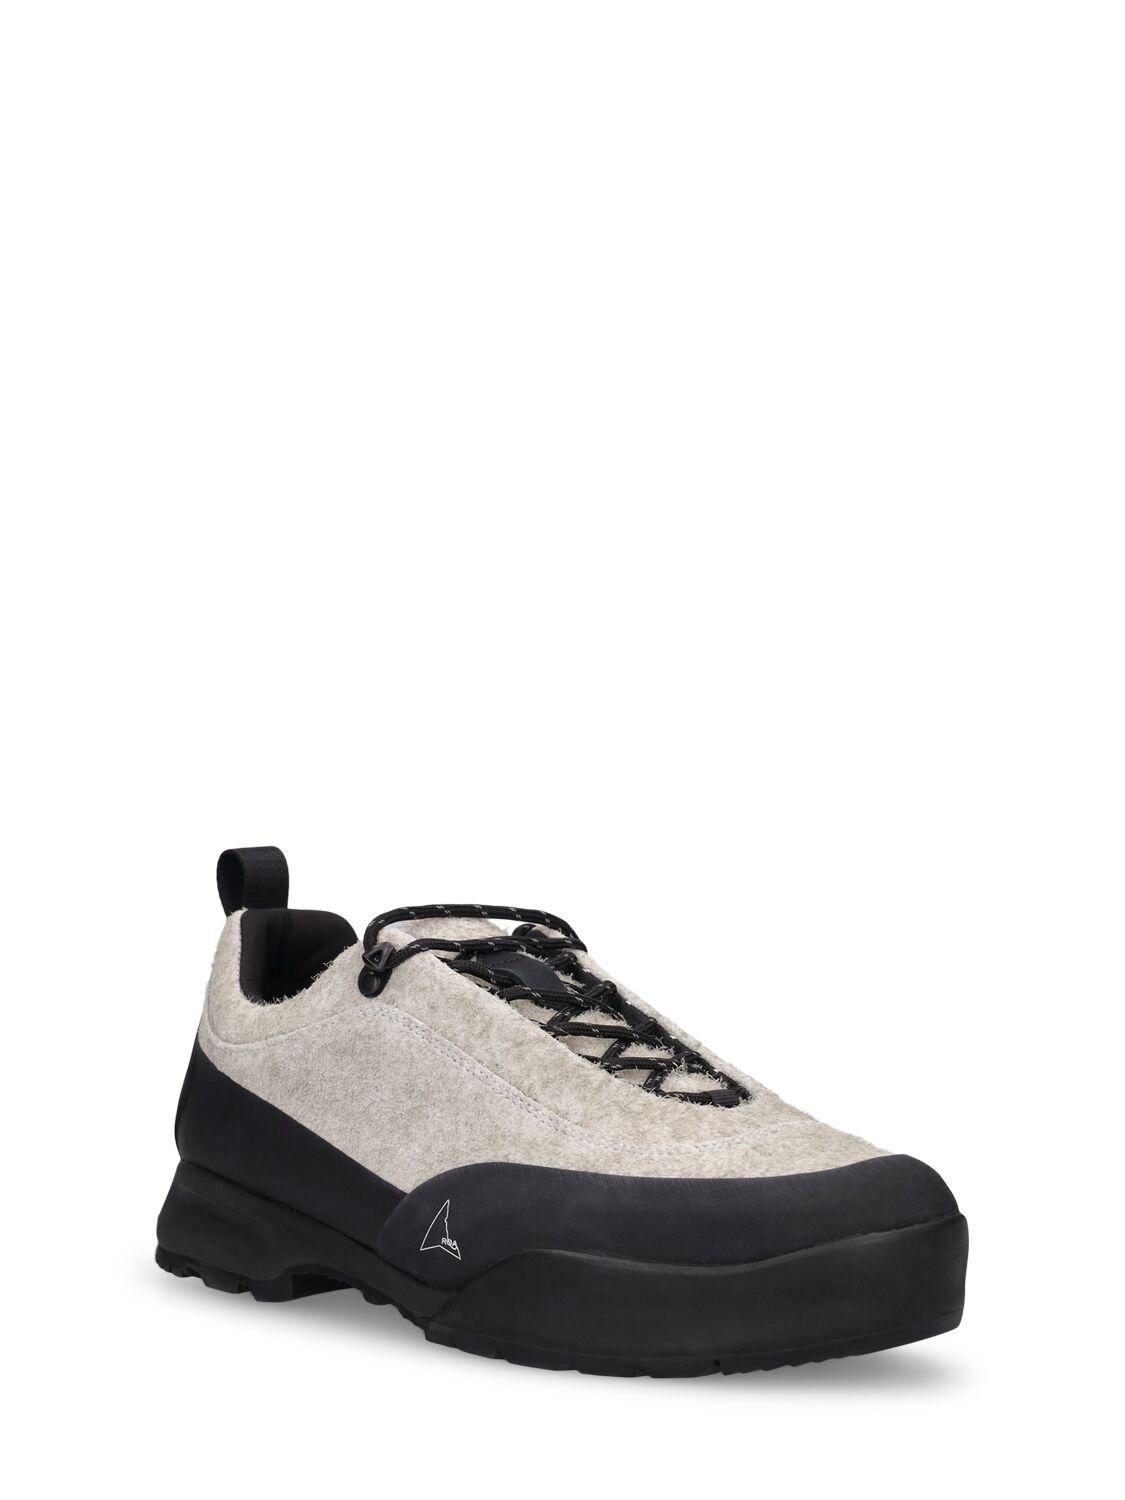 Shop Roa Cingino Leather Sneakers In Off White,black